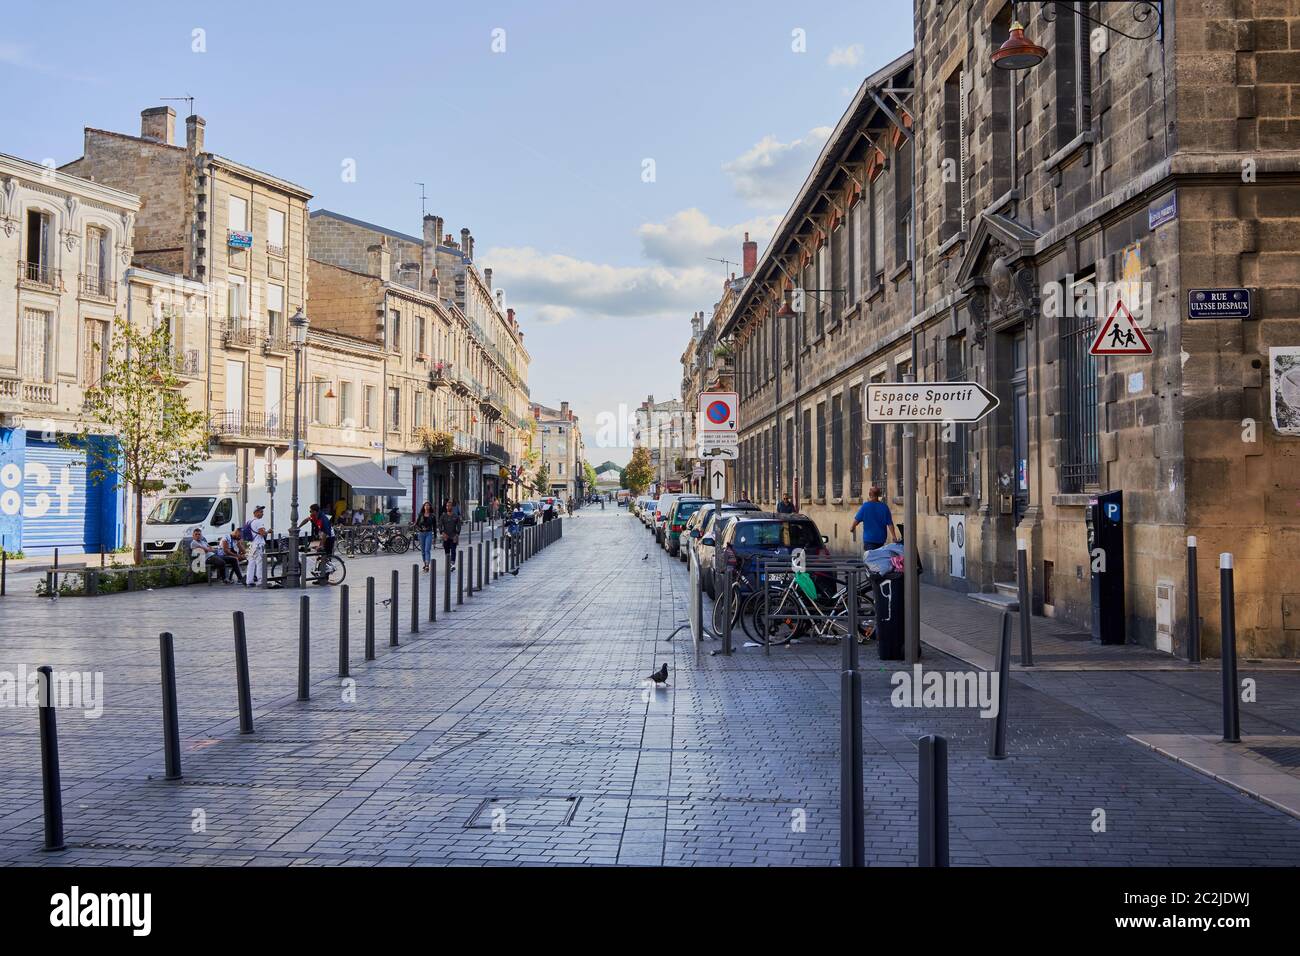 Meynard Plaza with cafes, bikes and pedestrians, Bordeaux City, France Stock Photo